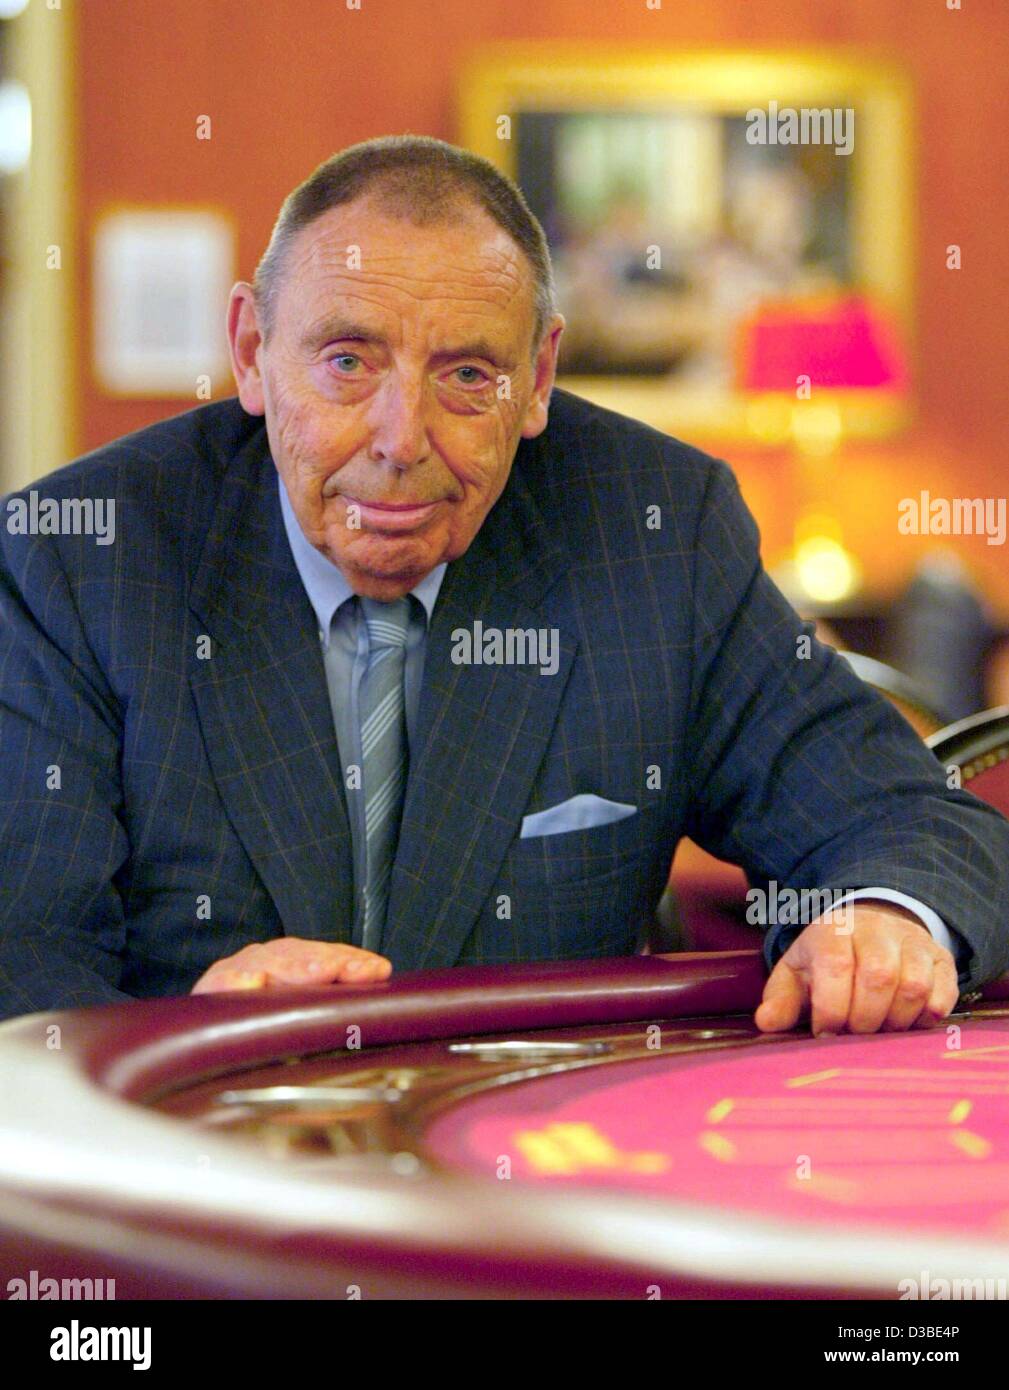 (dpa) - John Jahr, Board Member of the German publishing company Gruner + Jahr AG and Associate of the casino in Hamburg, sits at a gambling table in the casino in Hamburg, 16 January 2003. Hamburg's casino celebrates its 25th anniversary on 20 January 2003. In Germany, 90 percent of the profits hav Stock Photo